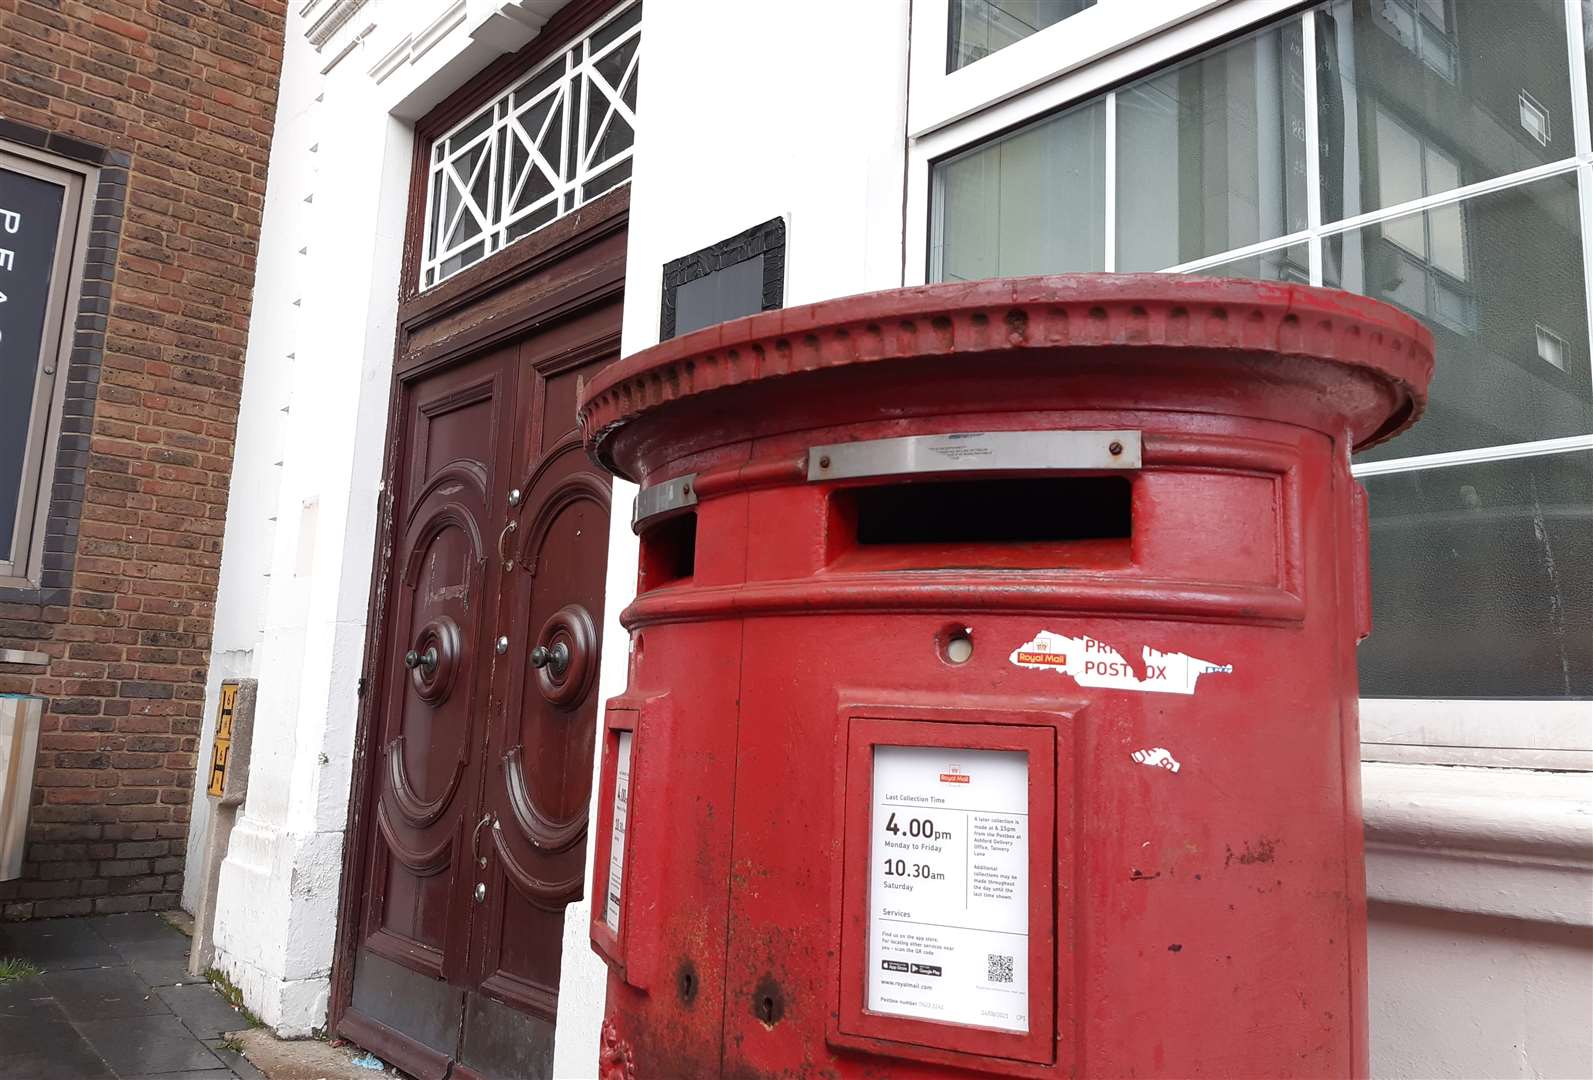 The Tufton Street site housed Ashford's Post Office for almost 100 years